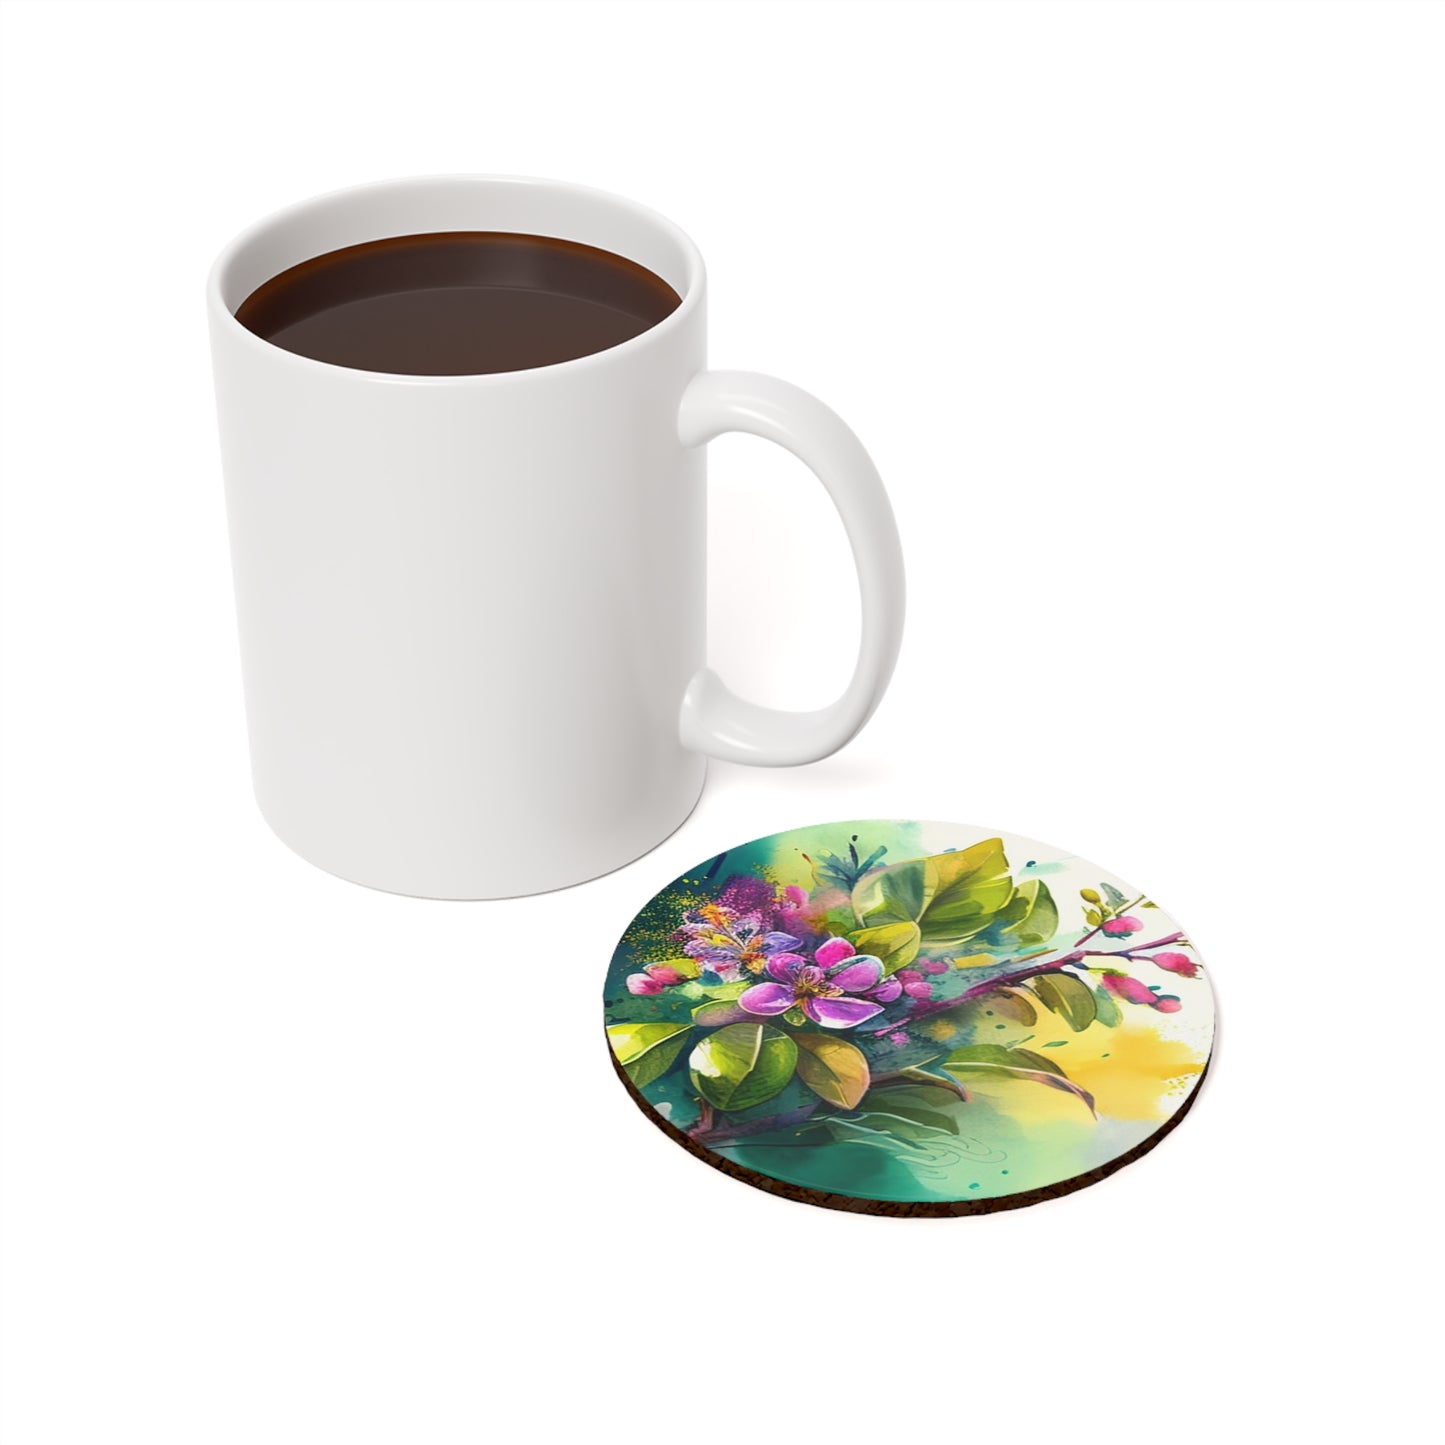 Cork Back Coaster Mother Nature Bright Spring Colors Realistic Watercolor 1